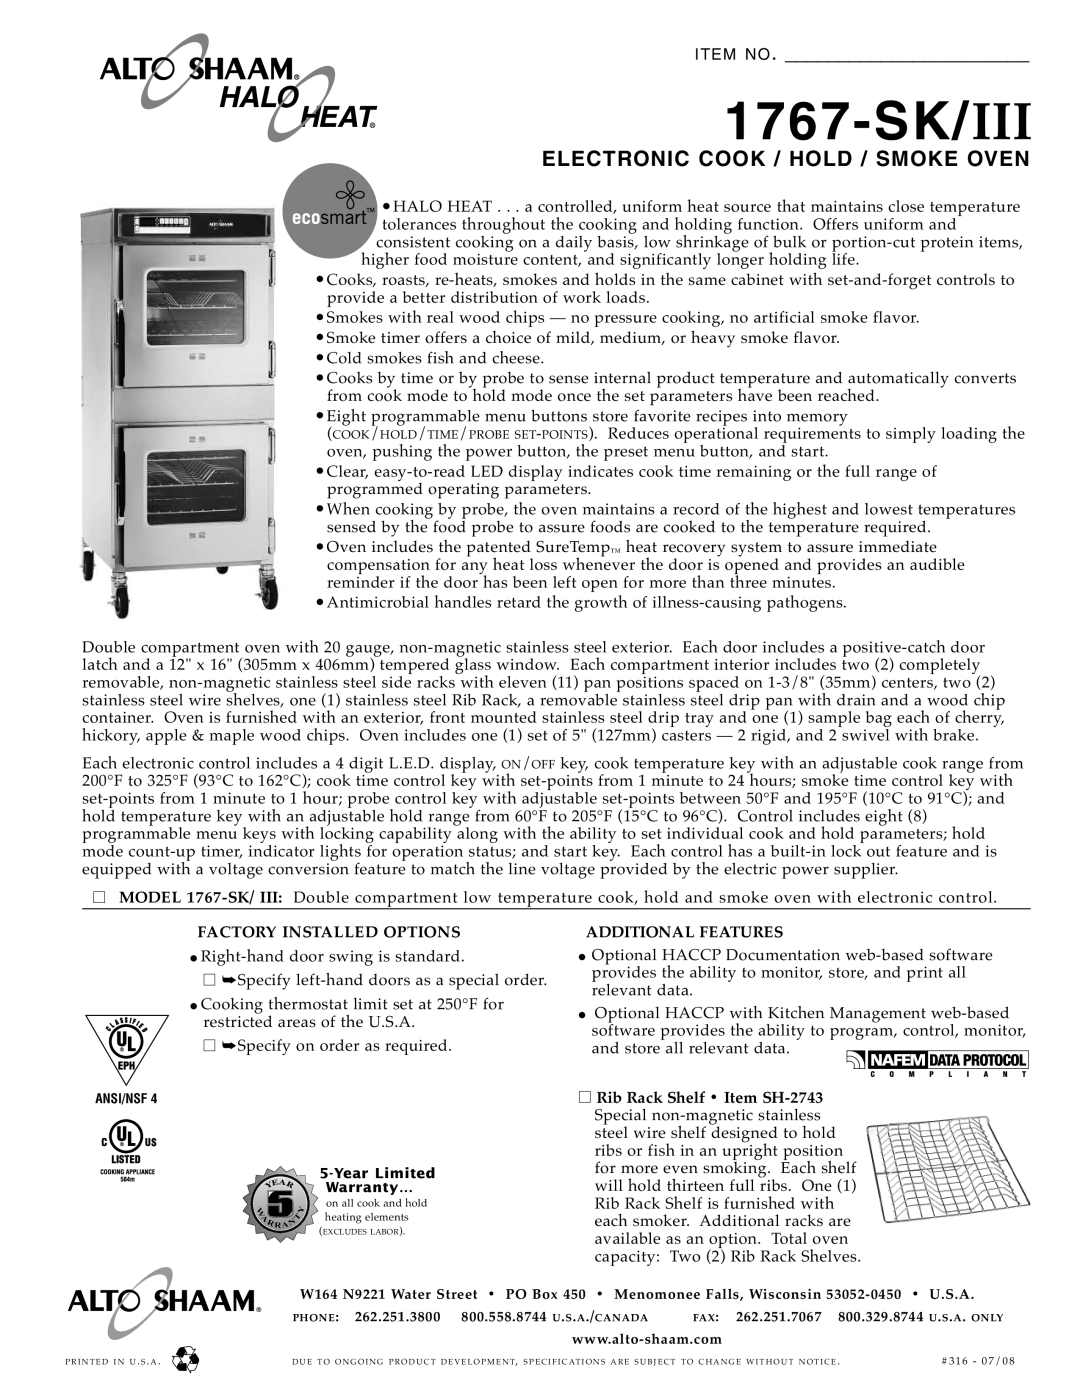 Alto-Shaam 1767-SK/III warranty 1767- SK, Electronic Cook / Hold / Smoke, Oven, Ite M No, Factory Installed Options 